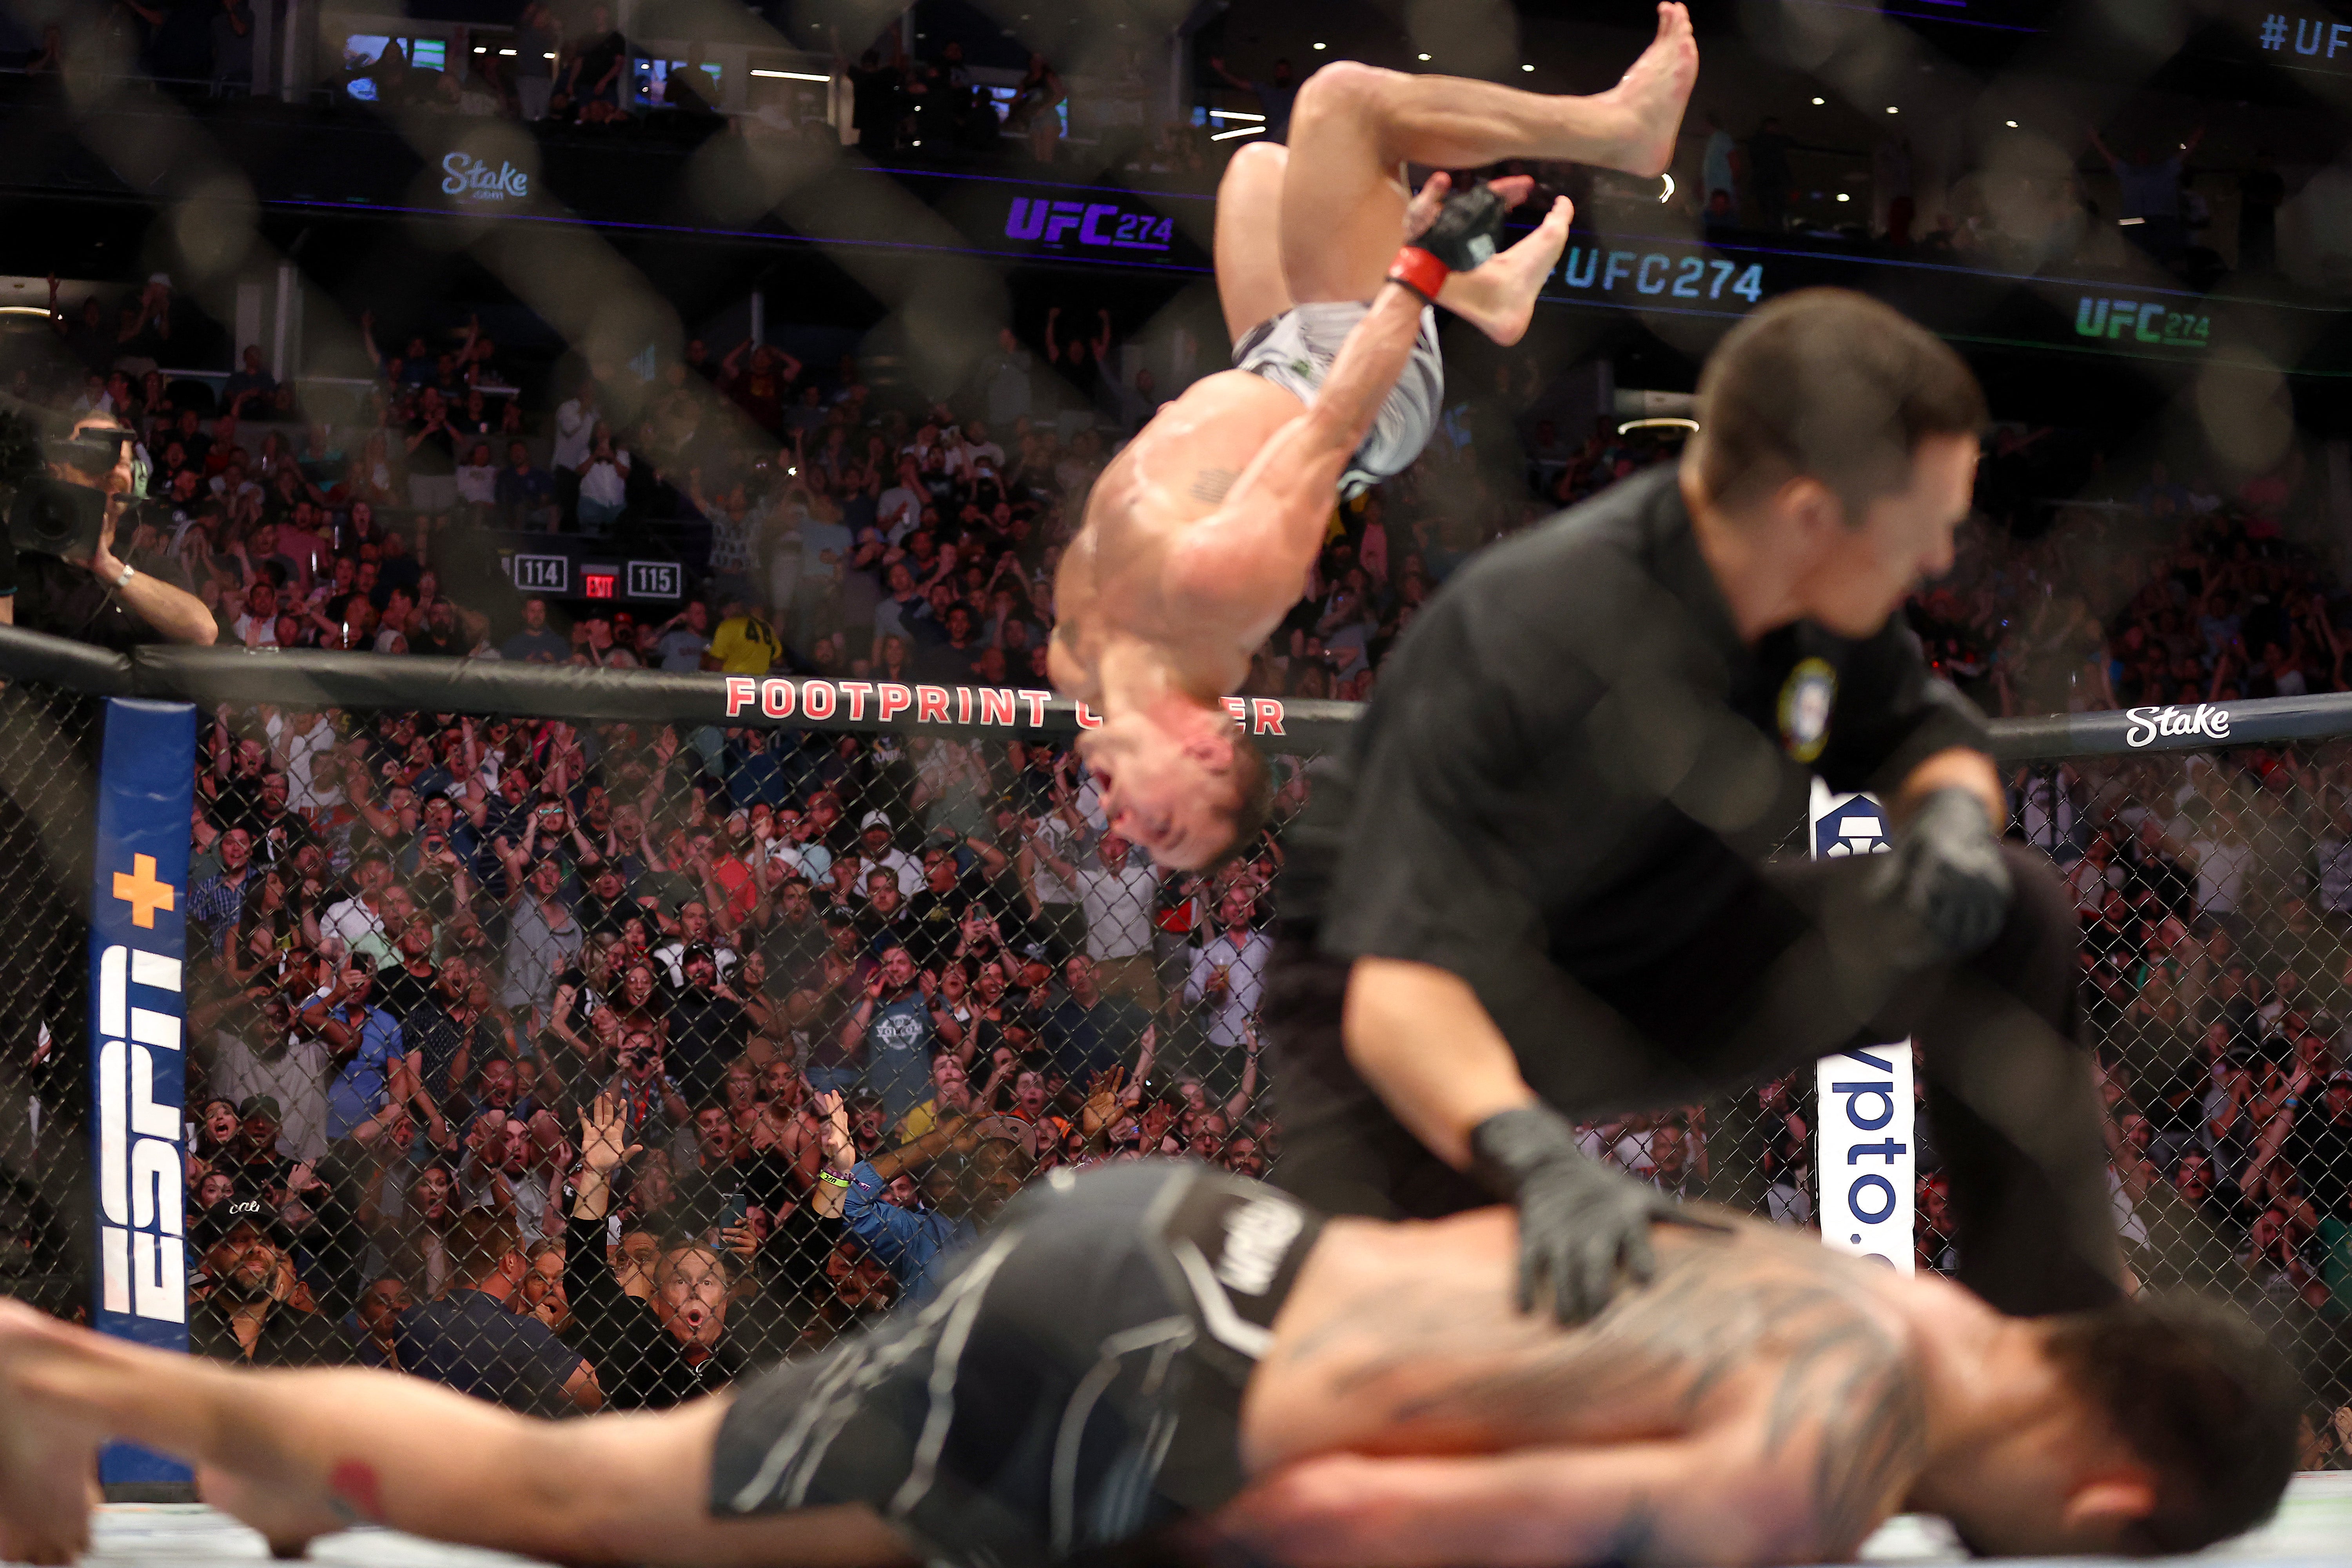 Chandler’s knockout of Tony Ferguson last year is deemed one of the greatest in UFC history